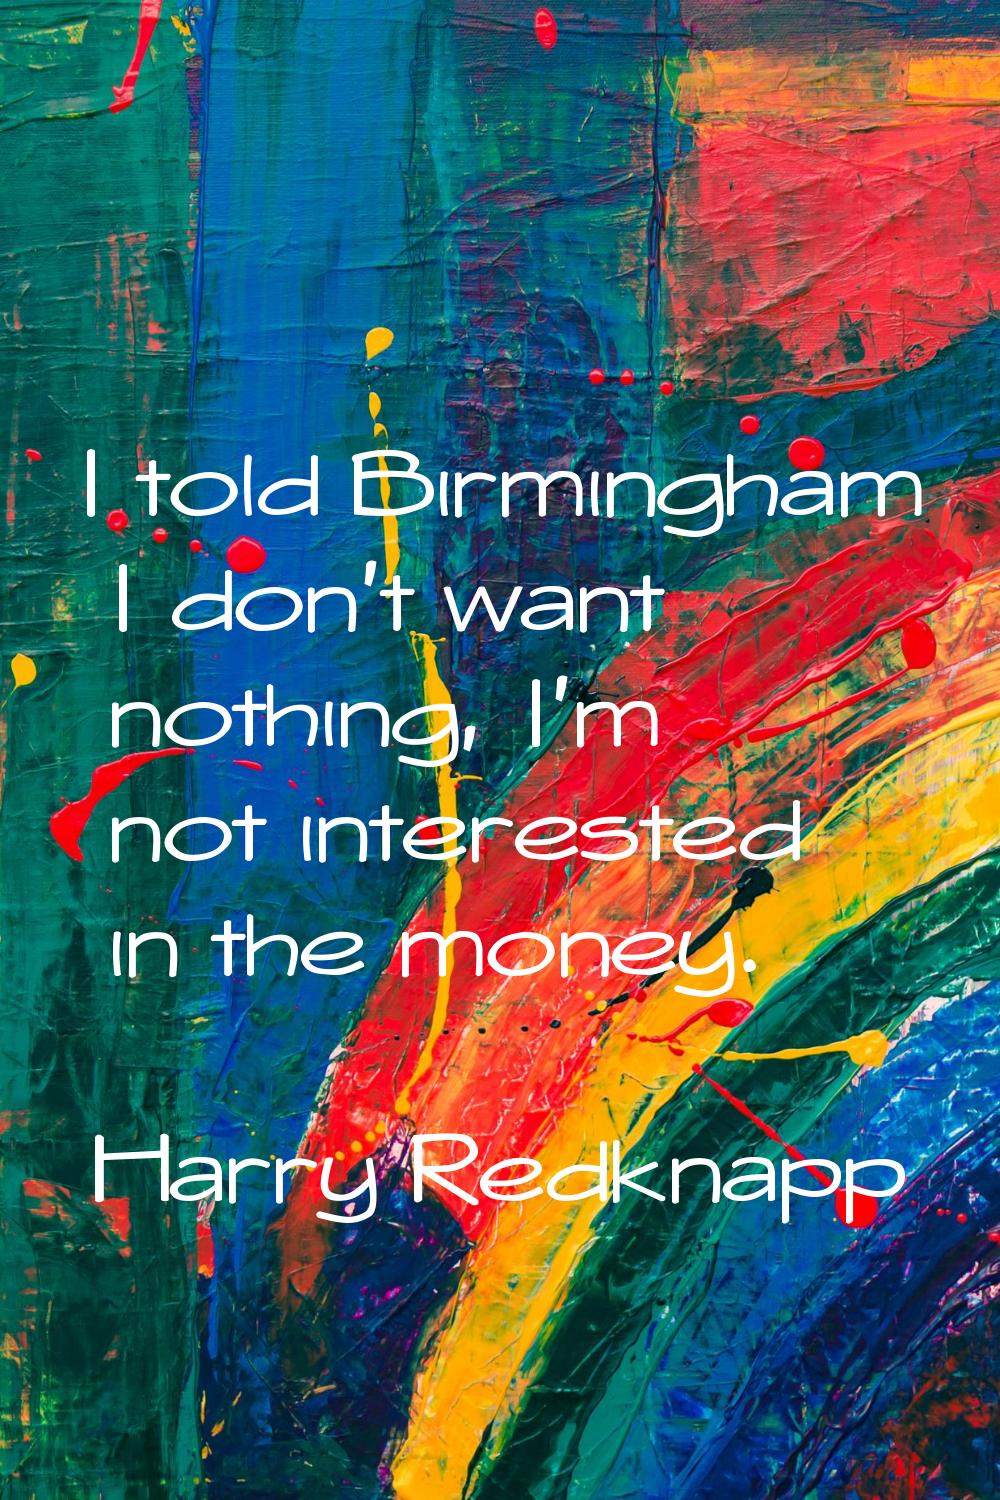 I told Birmingham I don't want nothing, I'm not interested in the money.